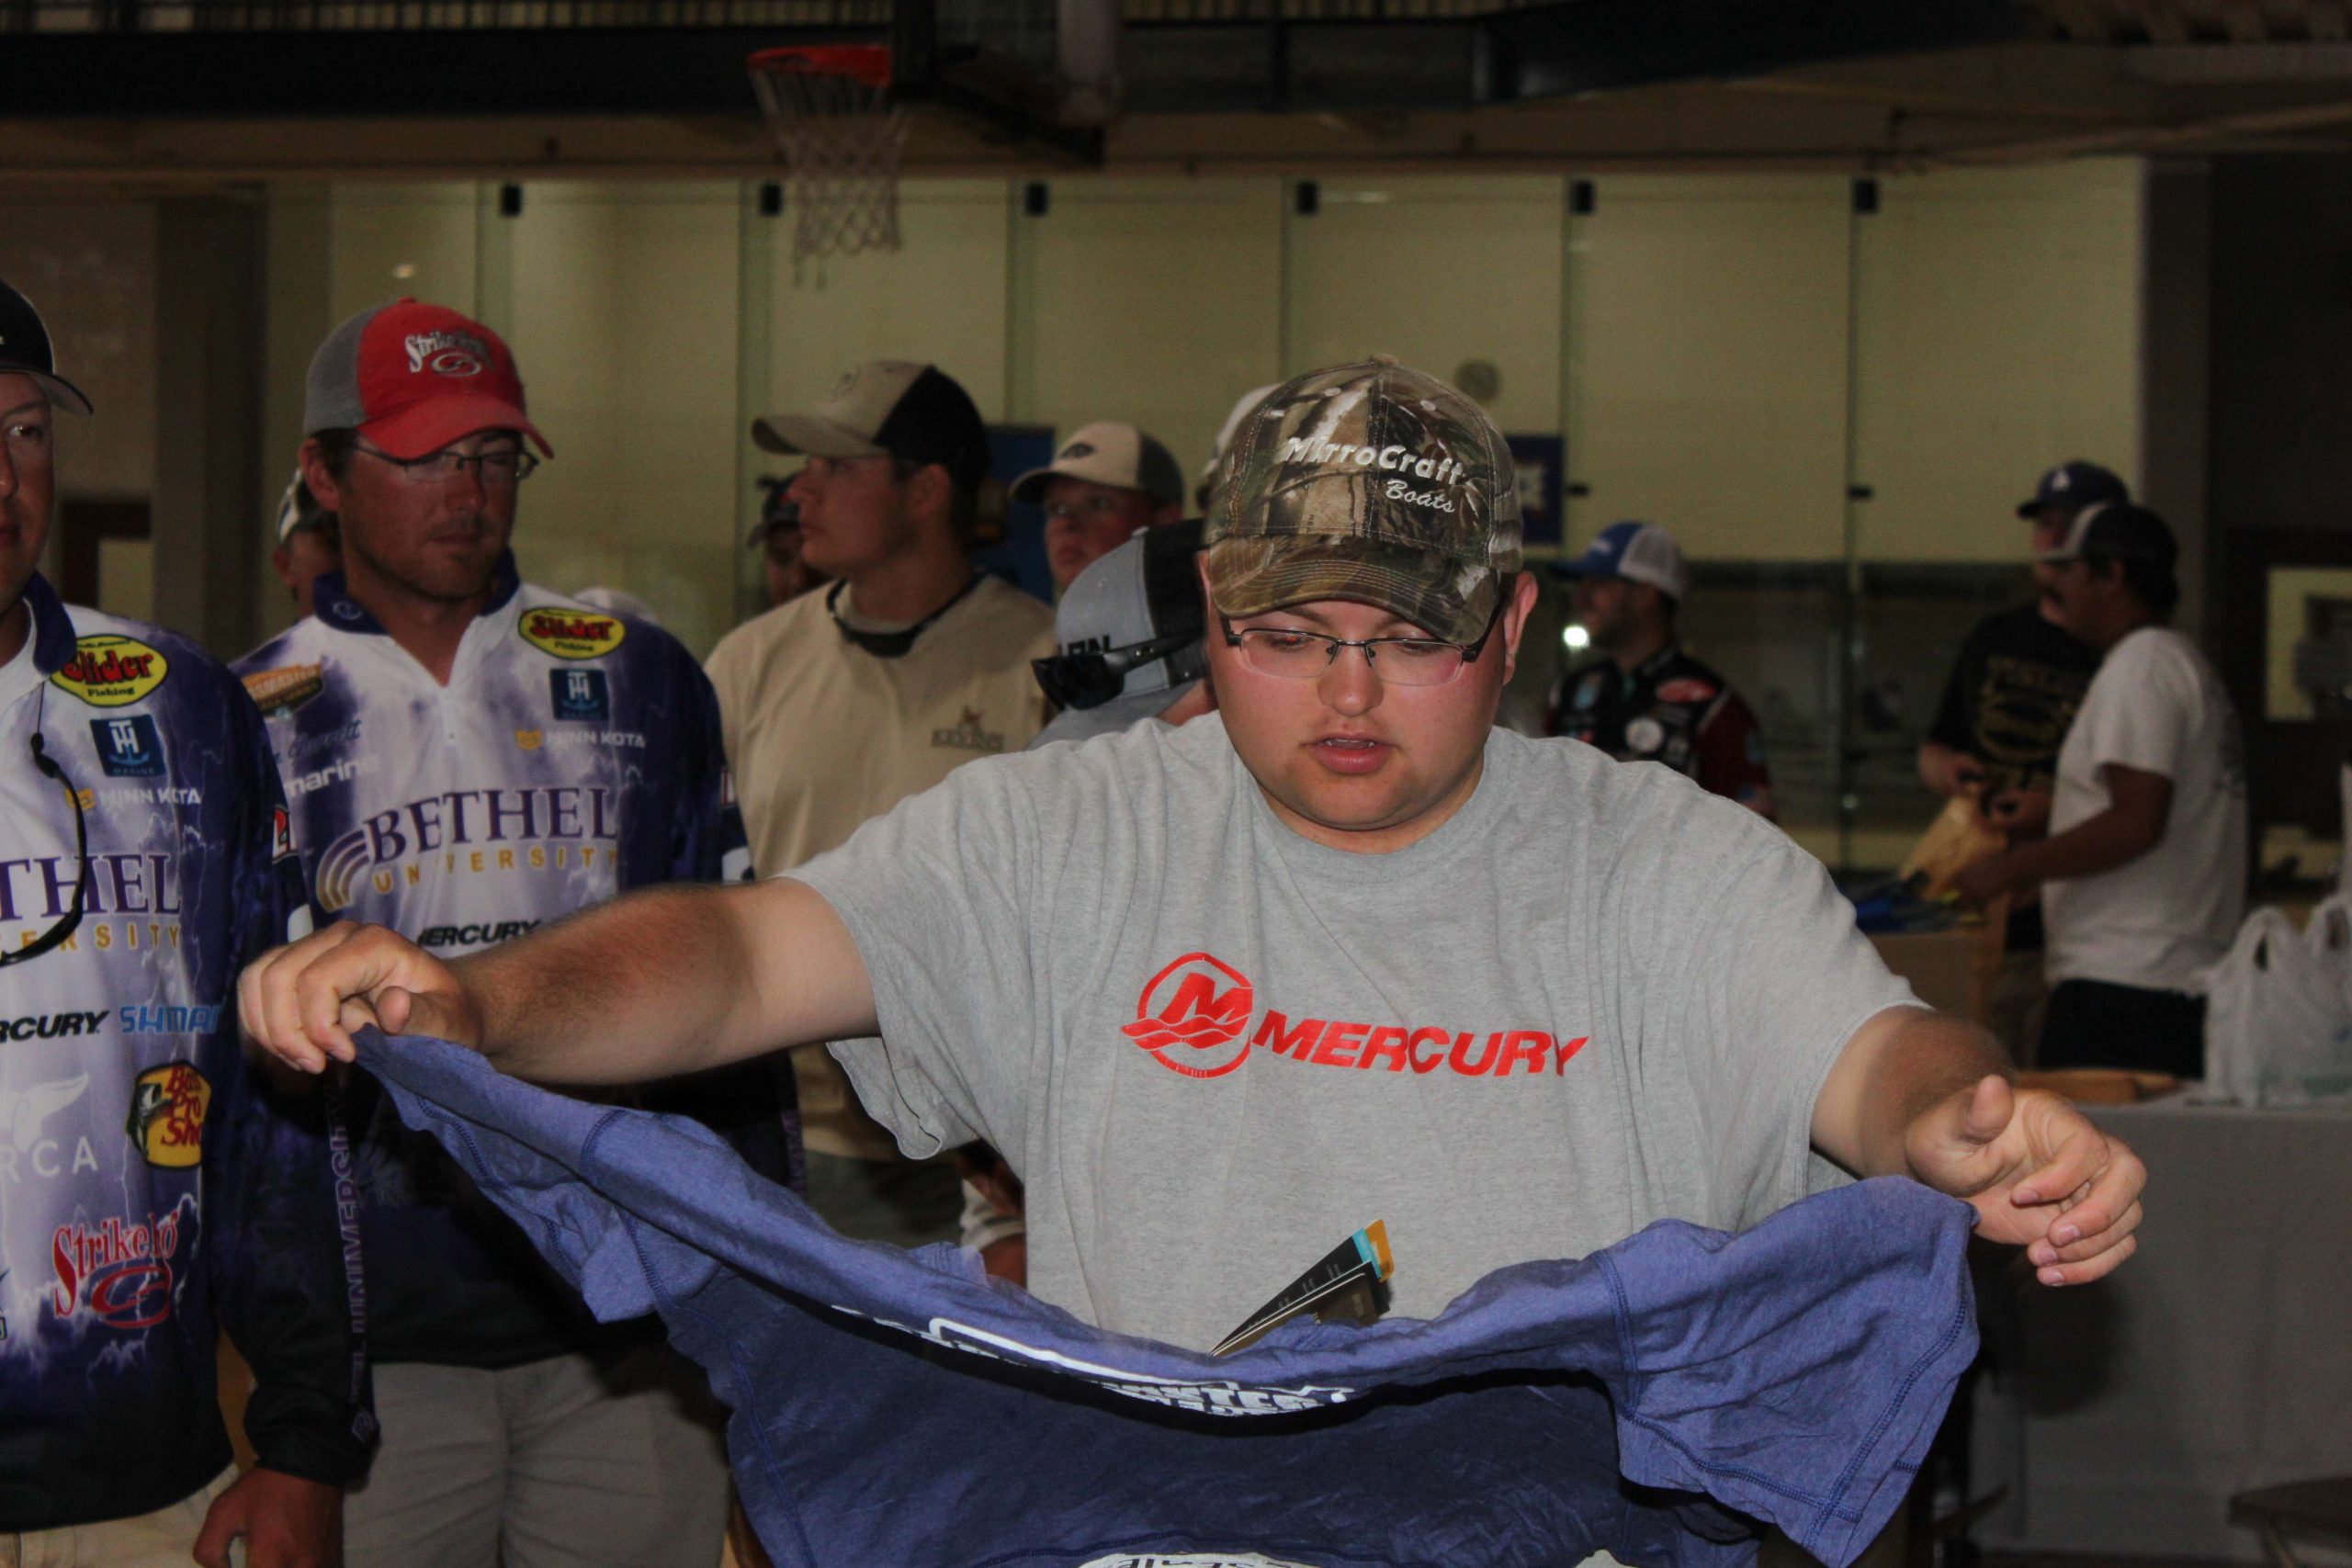  This angler sizes up a t-shirt to see if itâs the right fit.